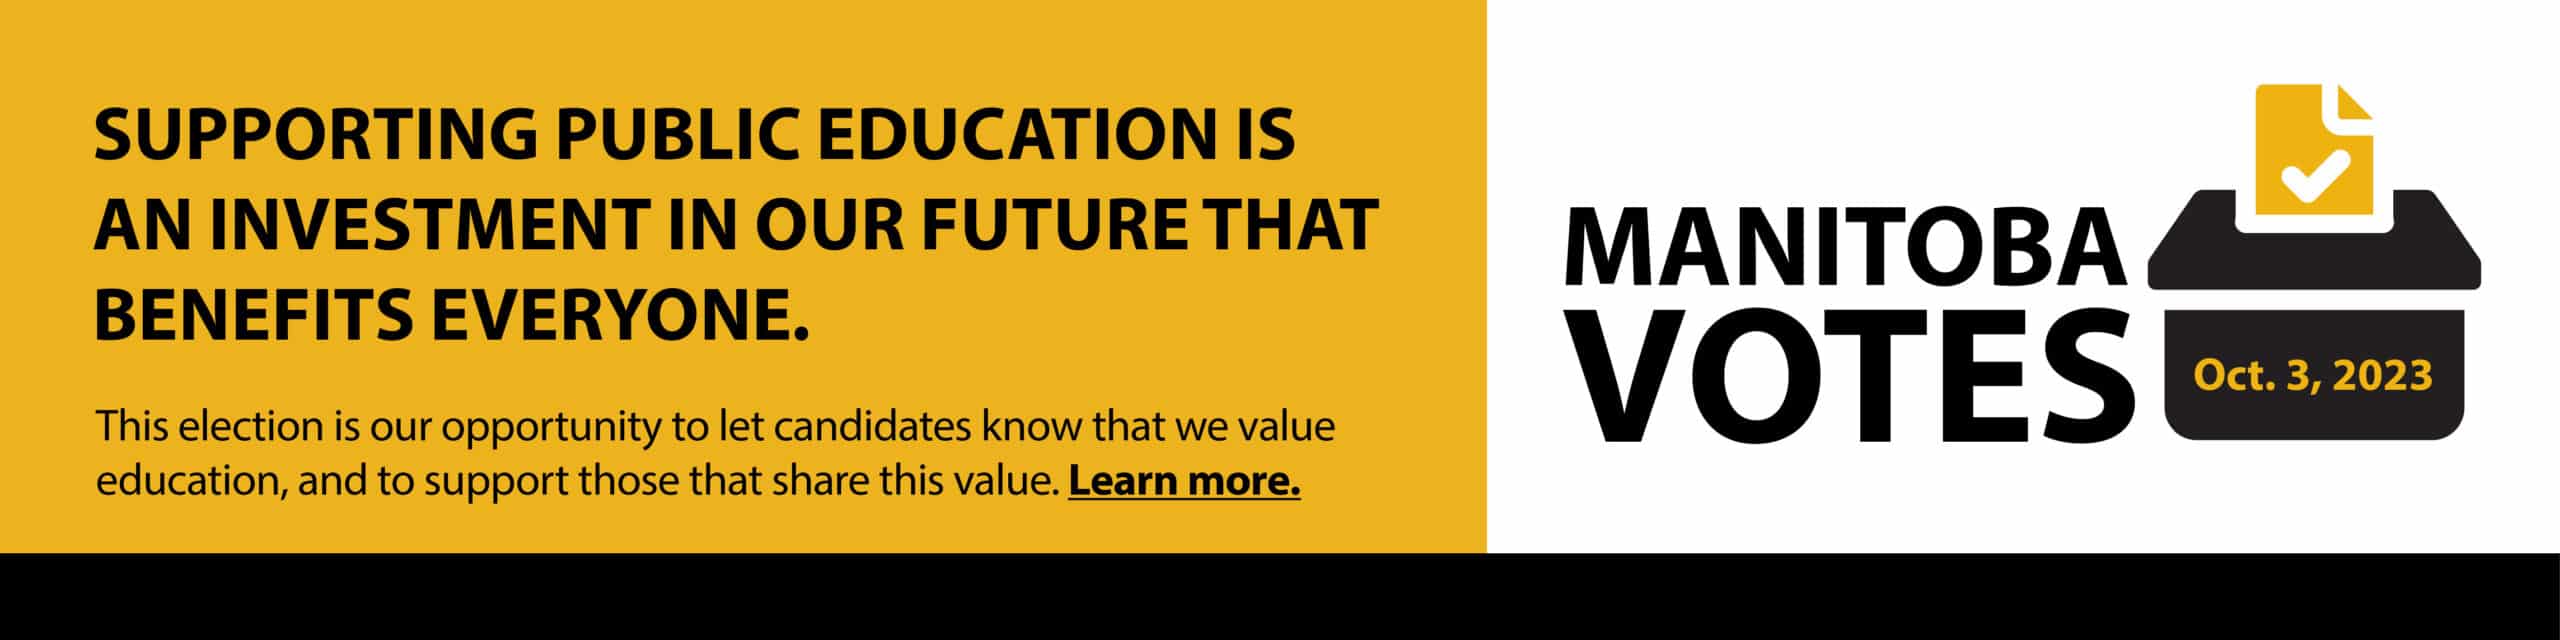 Supporting public education is an investment in our future that benefits everyone. This election is our opportunity to let candidates know that we value education and to support those that share this value. Learn more. The banner is linked to a webpage about the upcoming provincial election. There is an image of a ballot box with the words Manitoba Votes. October 3, 2023.